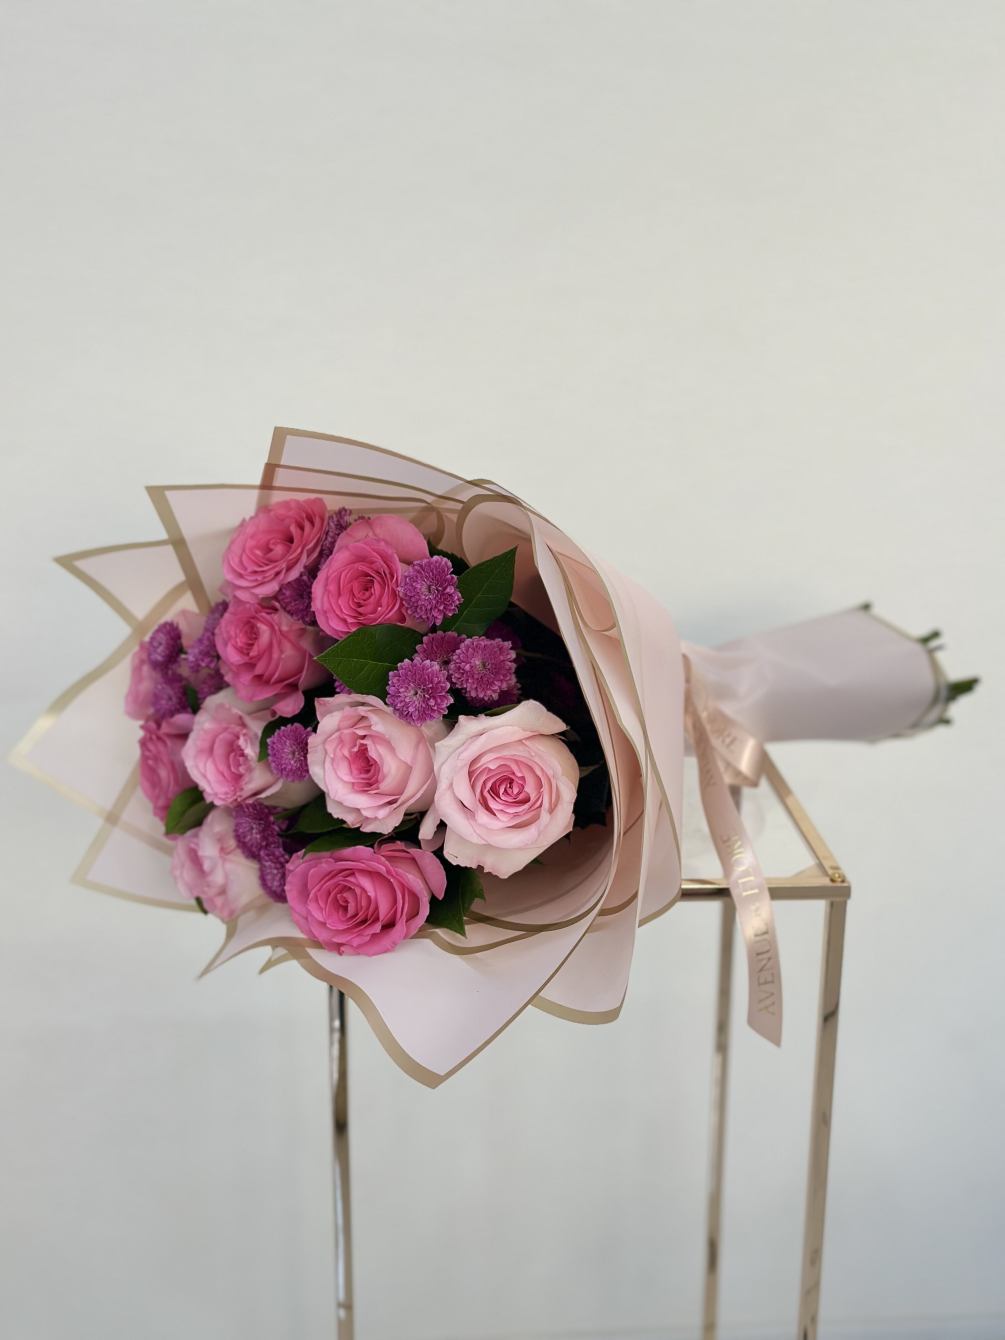 This charming bouquet blends the playful elegance of pink roses with the